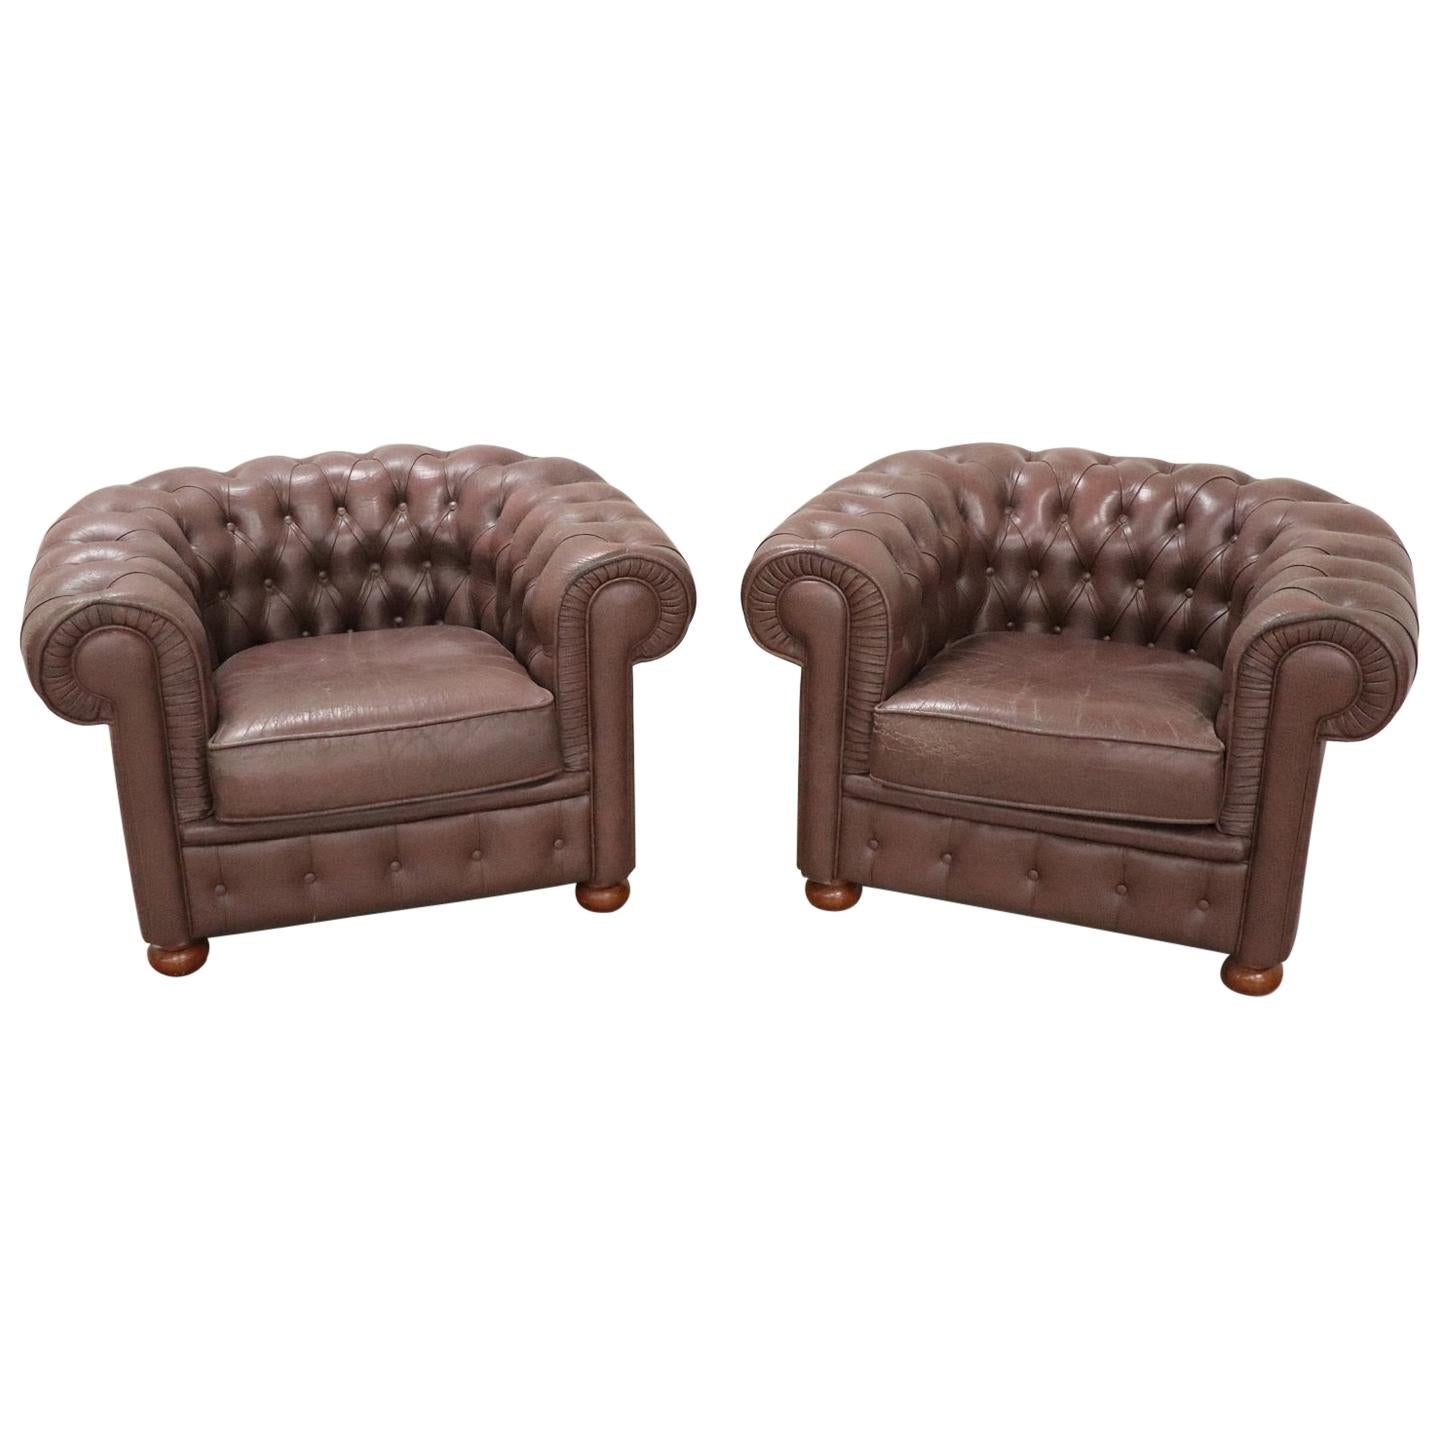 20th Century Vintage Pair of Leather English Chesterfield Armchairs